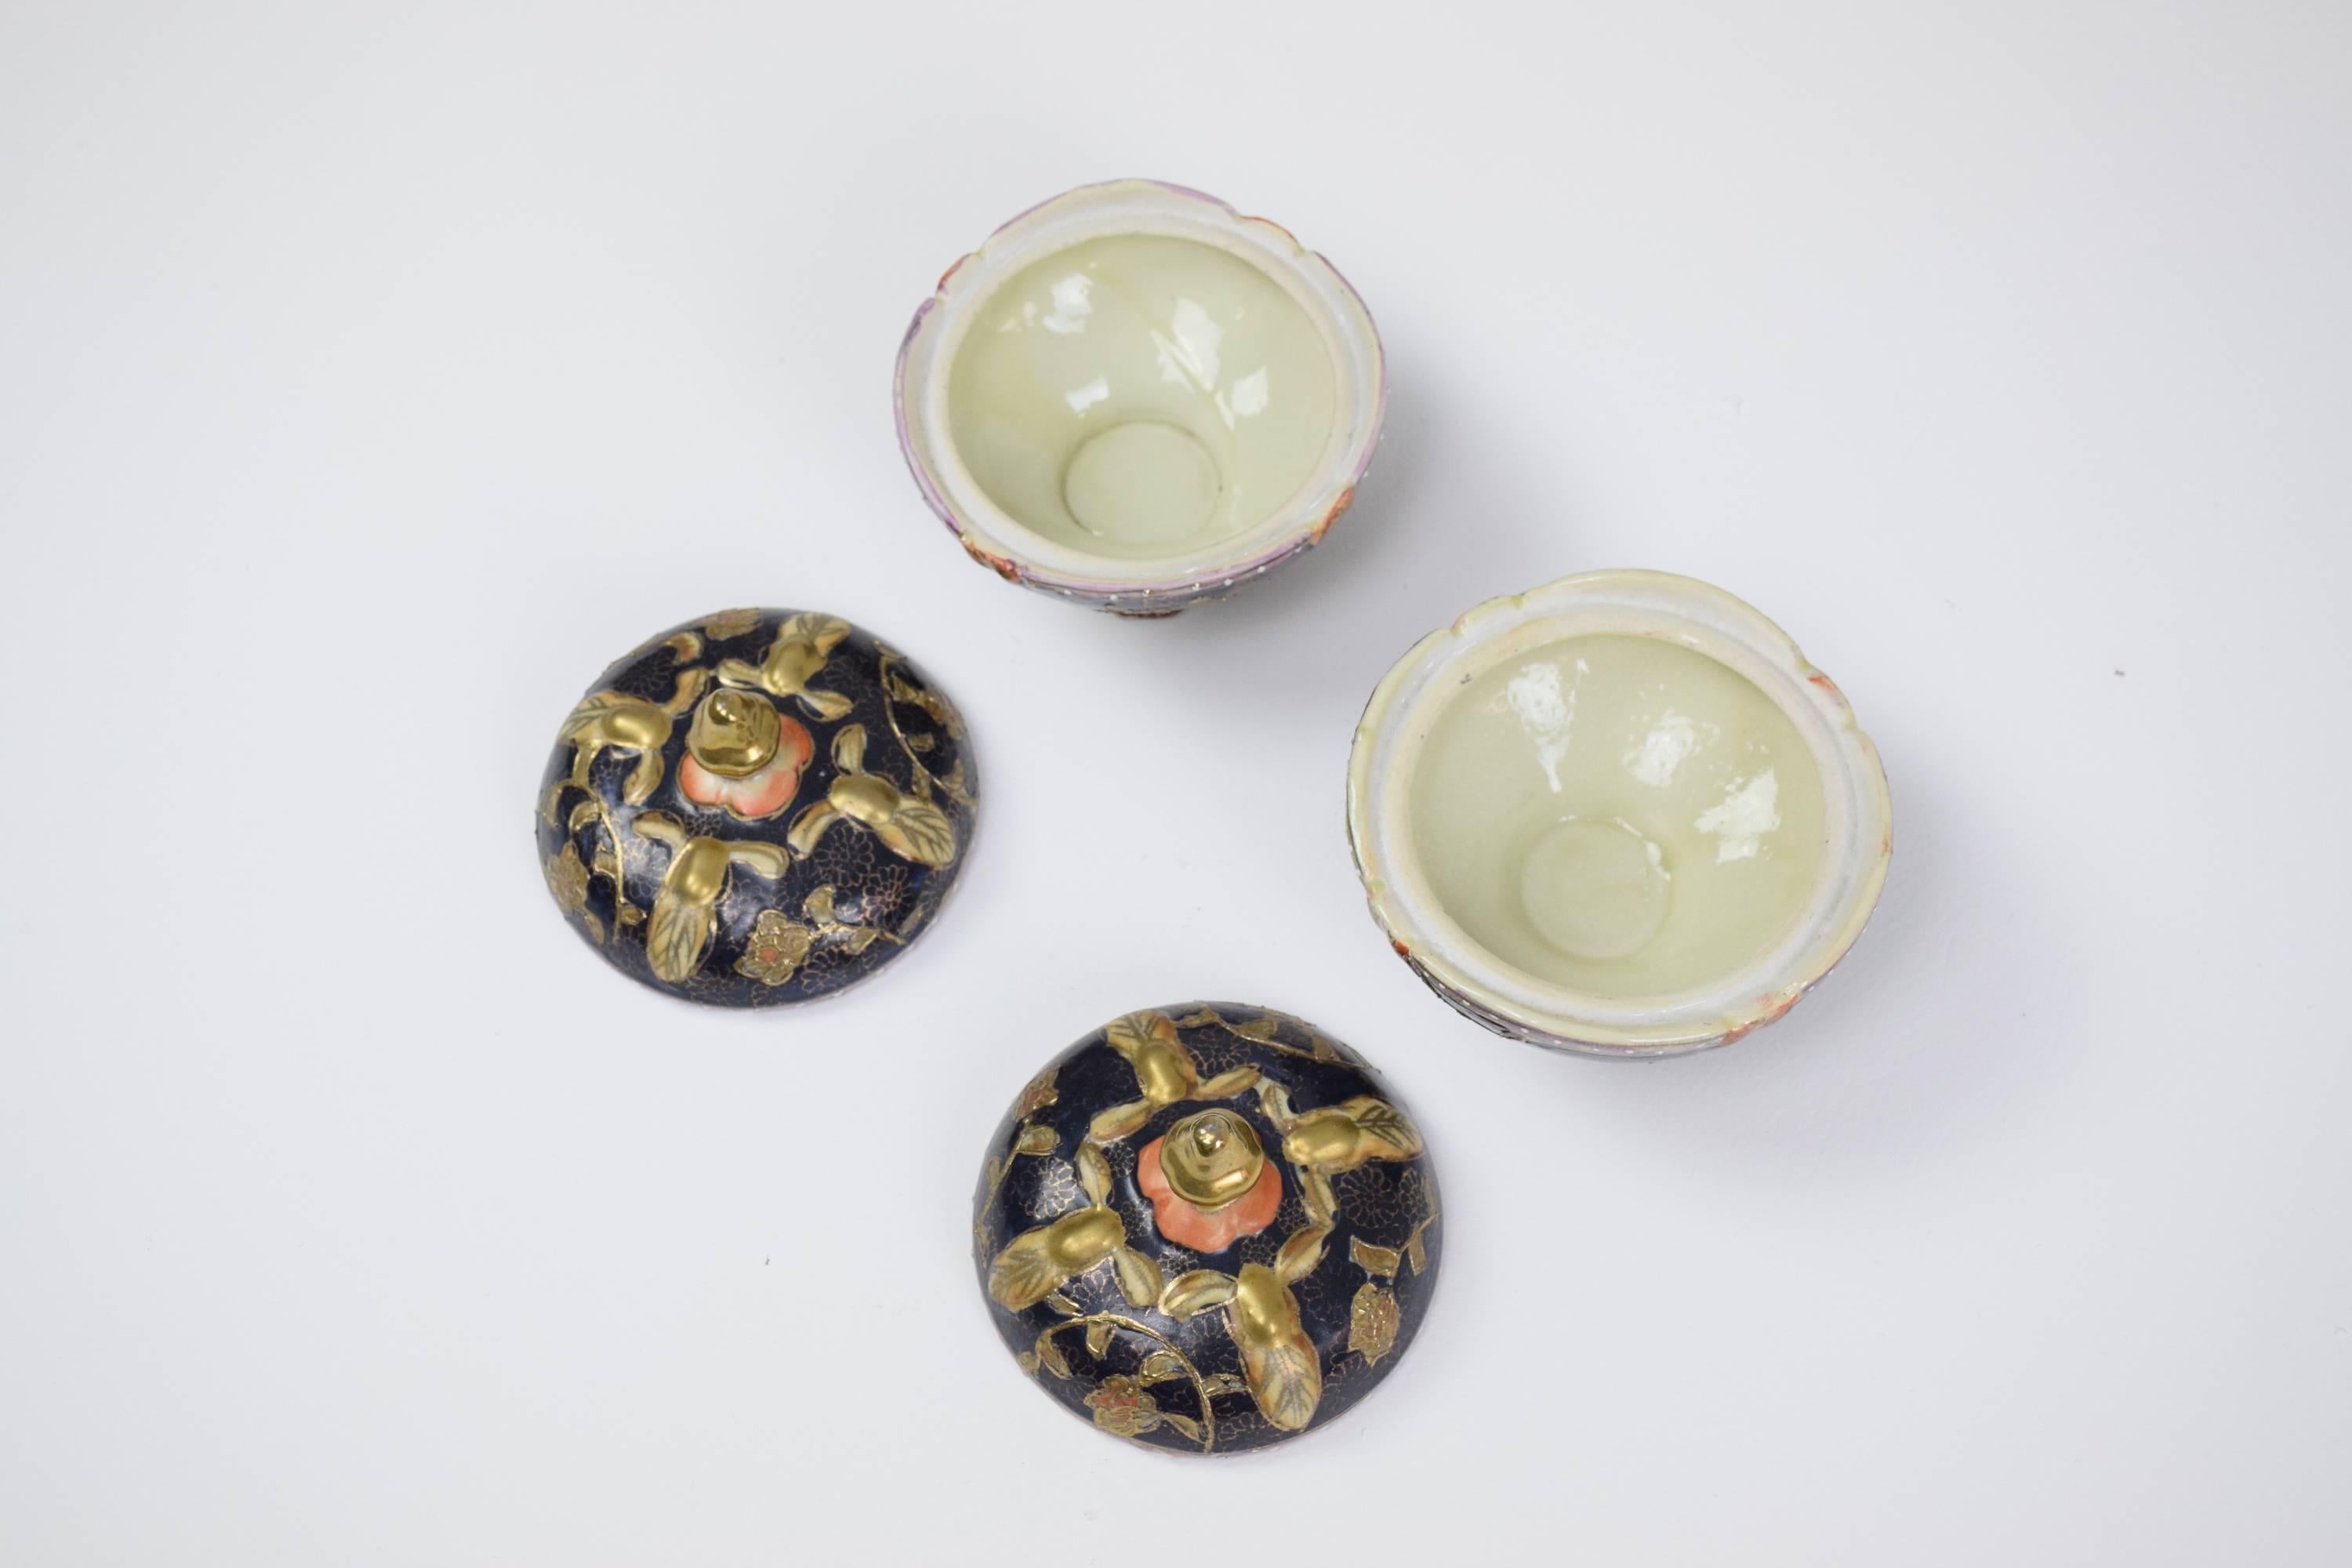 Pair of antique porcelain and gold leaf decorative trinket, pill or jewelry boxes / dishes of Satsuma ware from the Dai Nippon/ Great Japan period and painted by Gyokushu. 

The Shimazu crest on top (circle with cross): Most old and authentic pieces